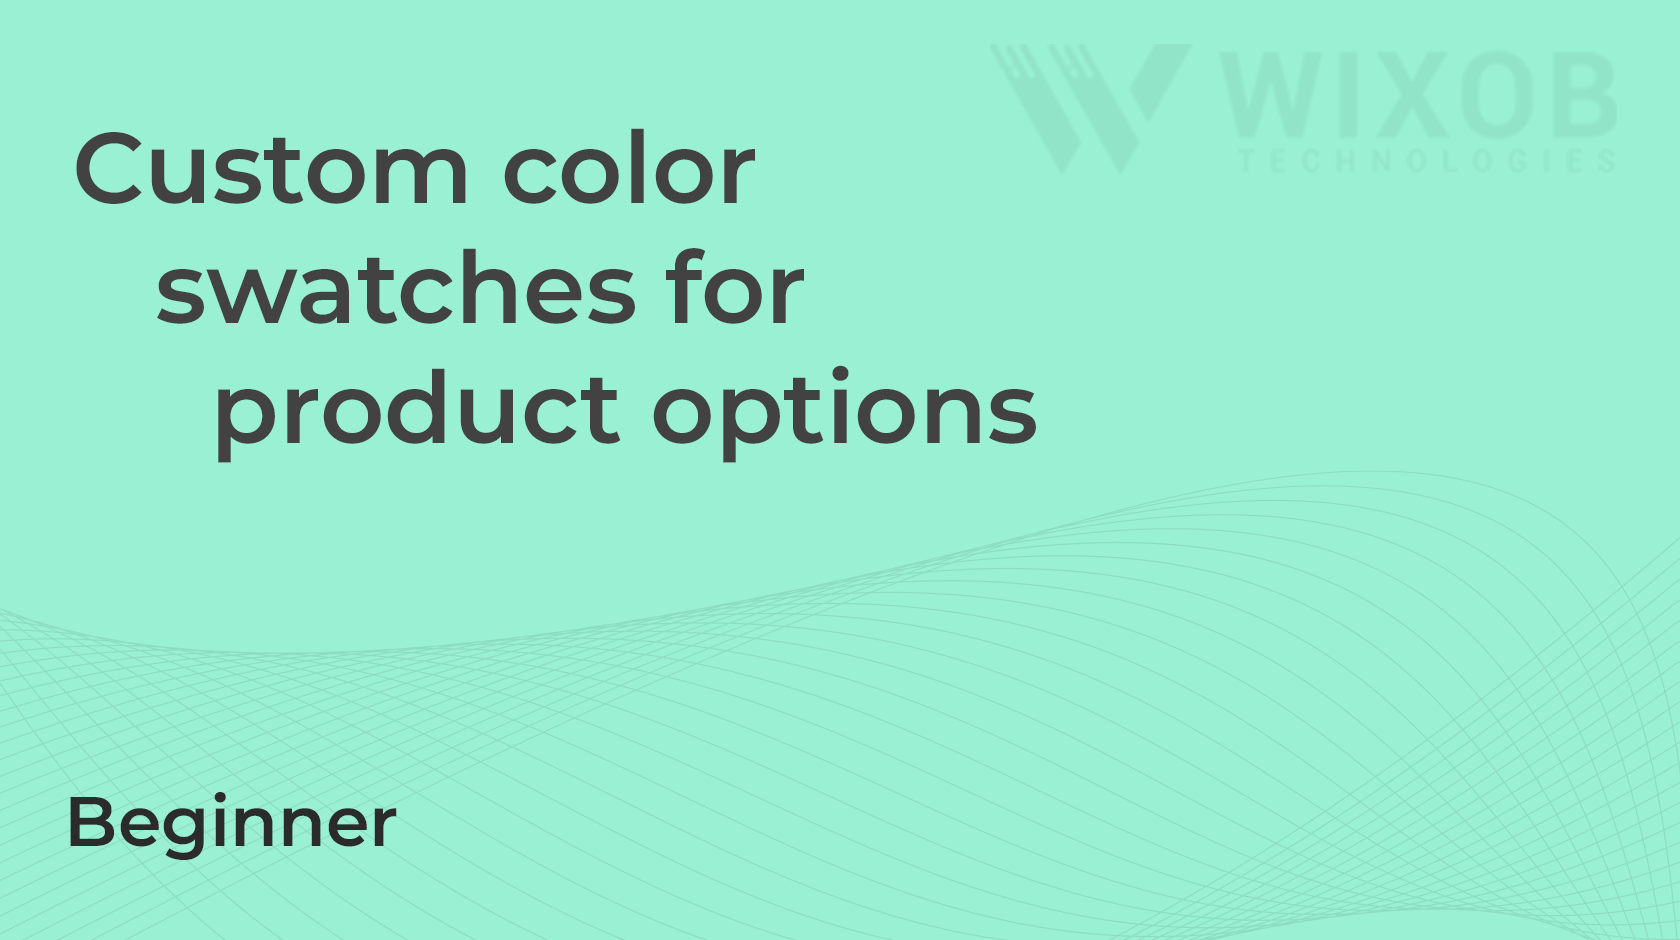 Custom color swatches for product options